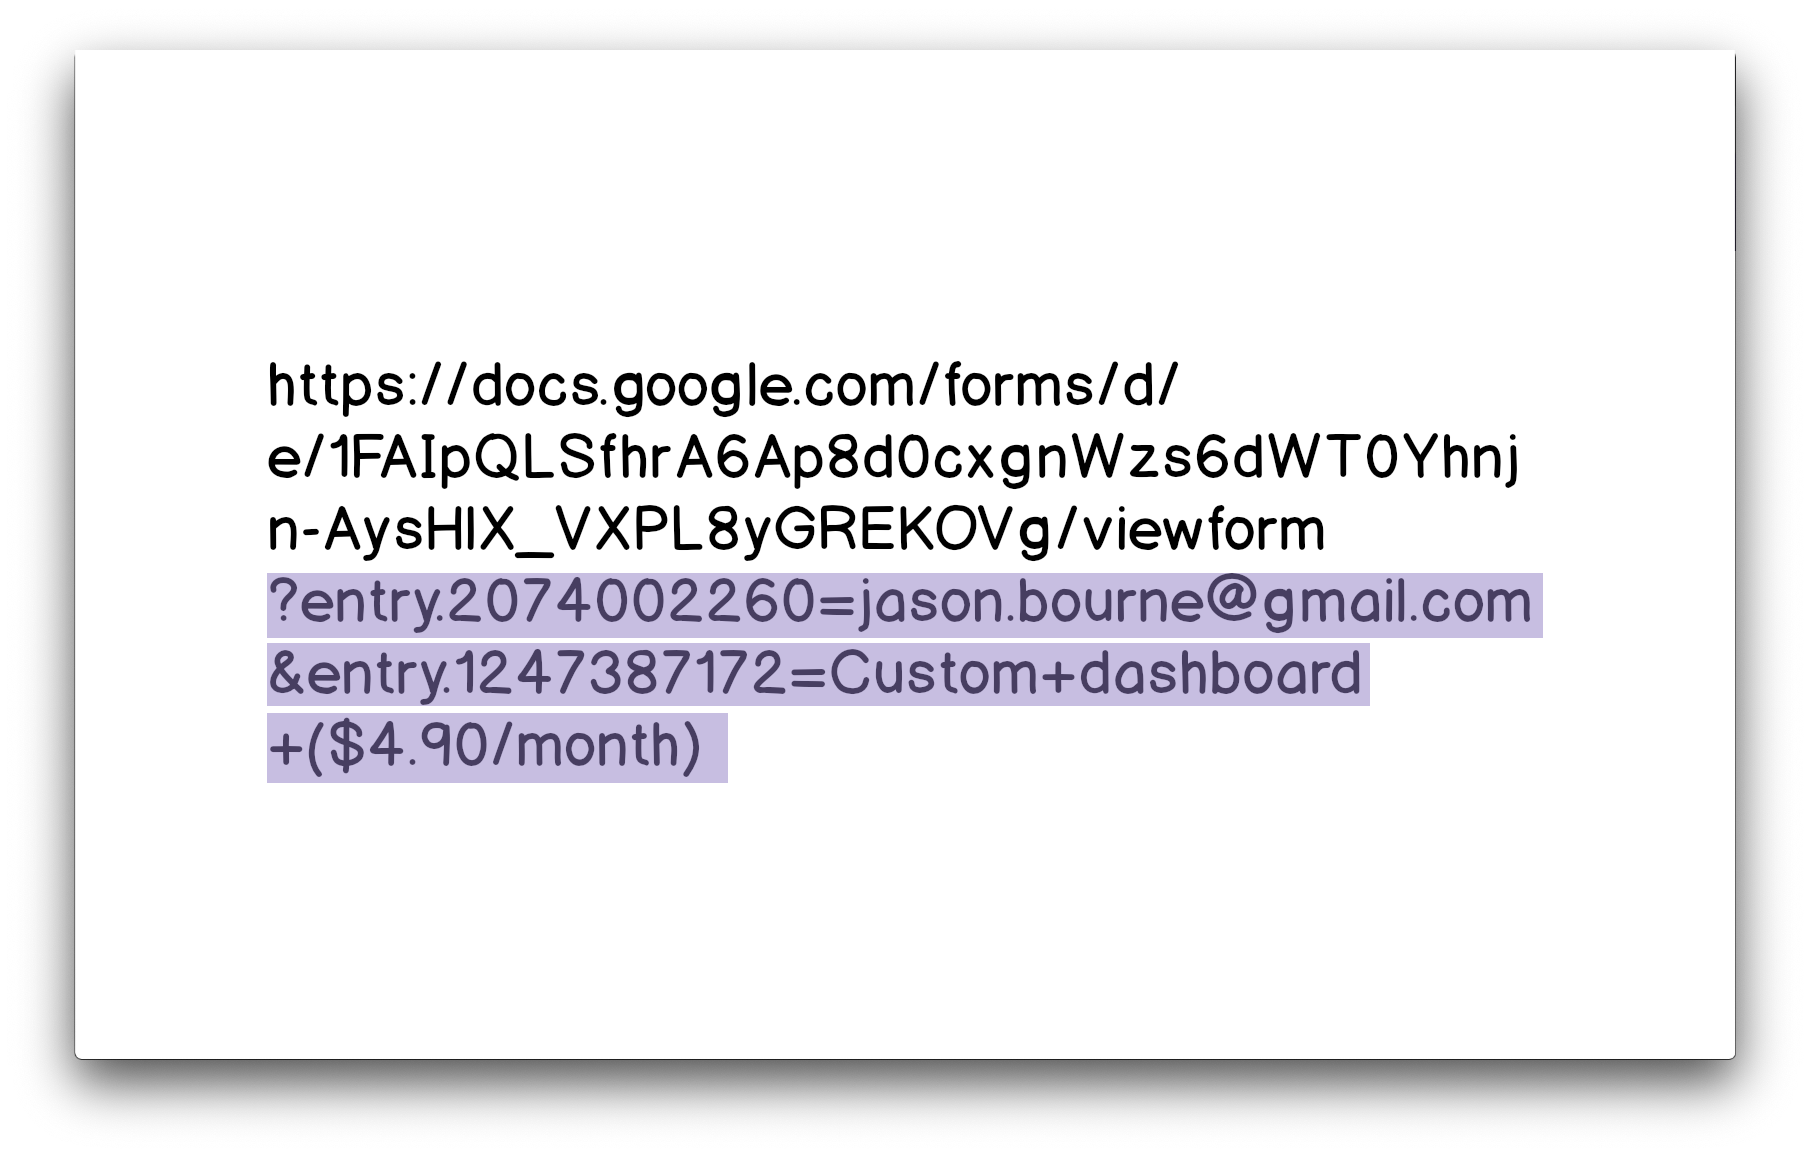 Copy the Google Form pre-fill parameters in the generated url